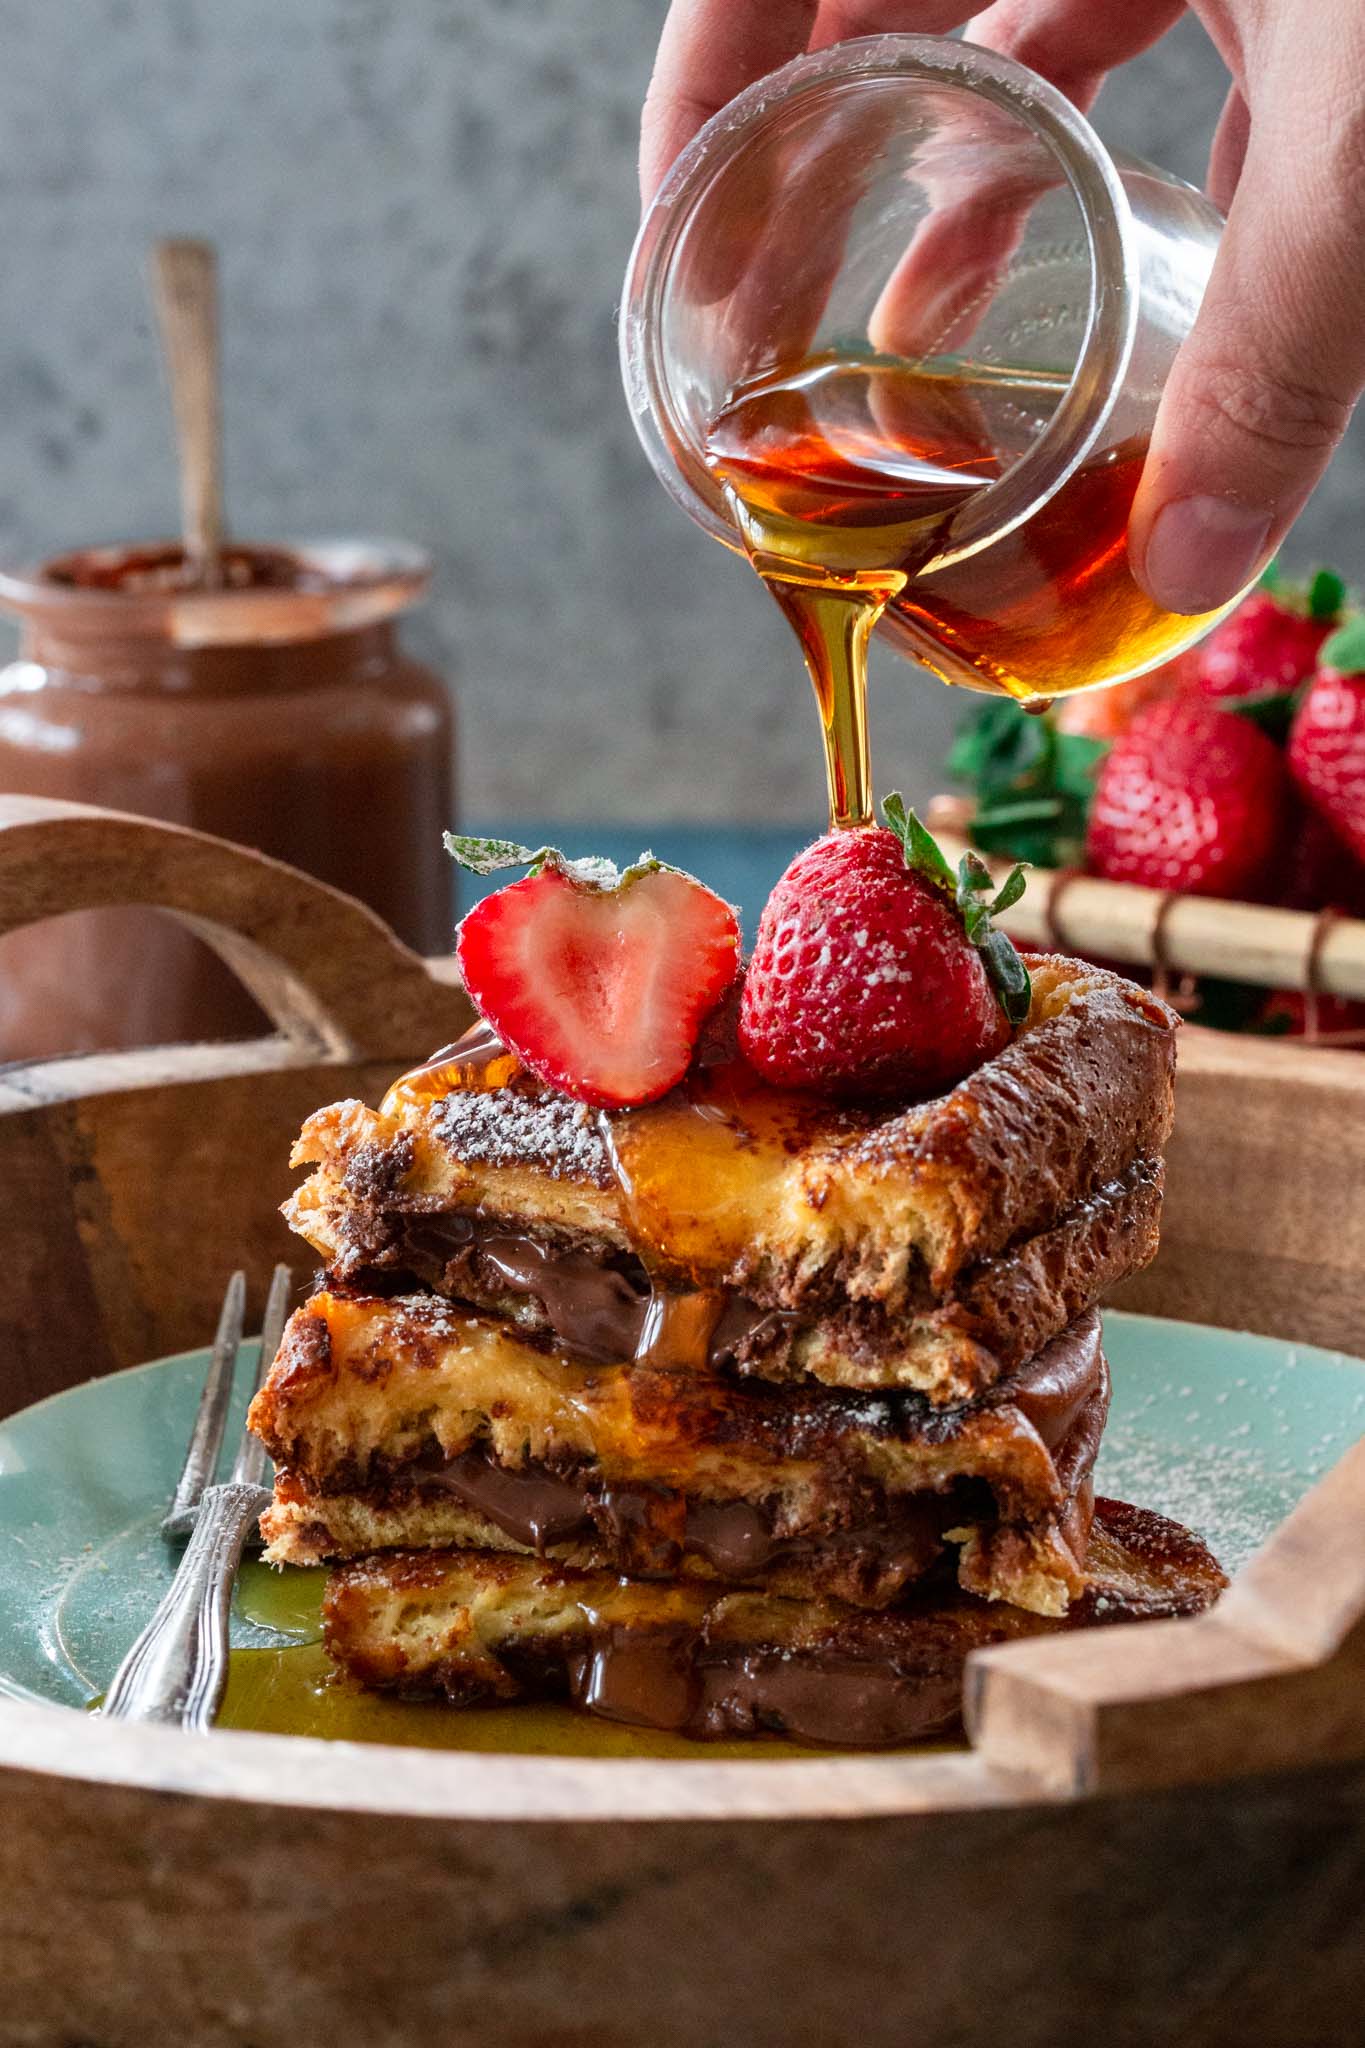 Pouring Maple syrup on Nutella French toast.